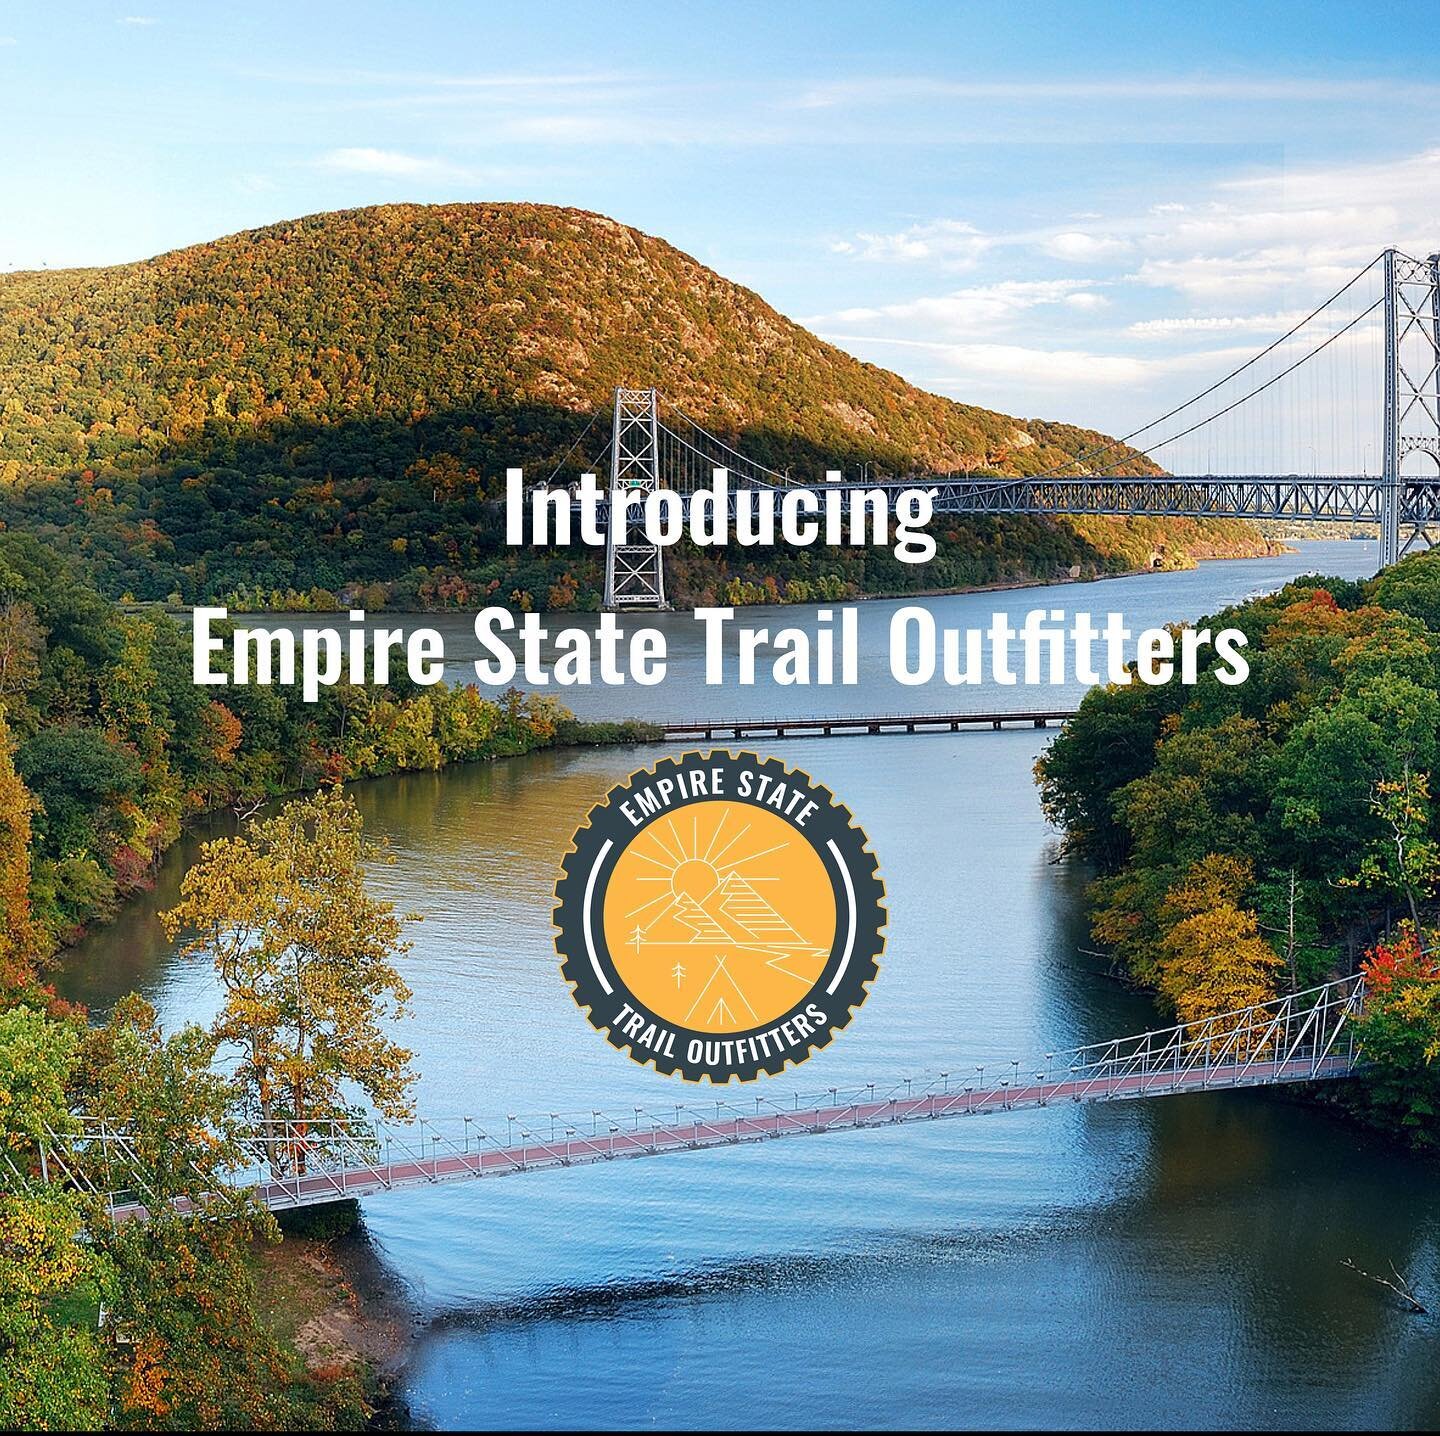 Welcome to Empire State Trail Outfitters!! 🎉 We are super excited to launch a brand new website where you can find your community along the Empire State Trail! Here you'll find trail and lodging guides, read inspiring stories and connect with Trailg